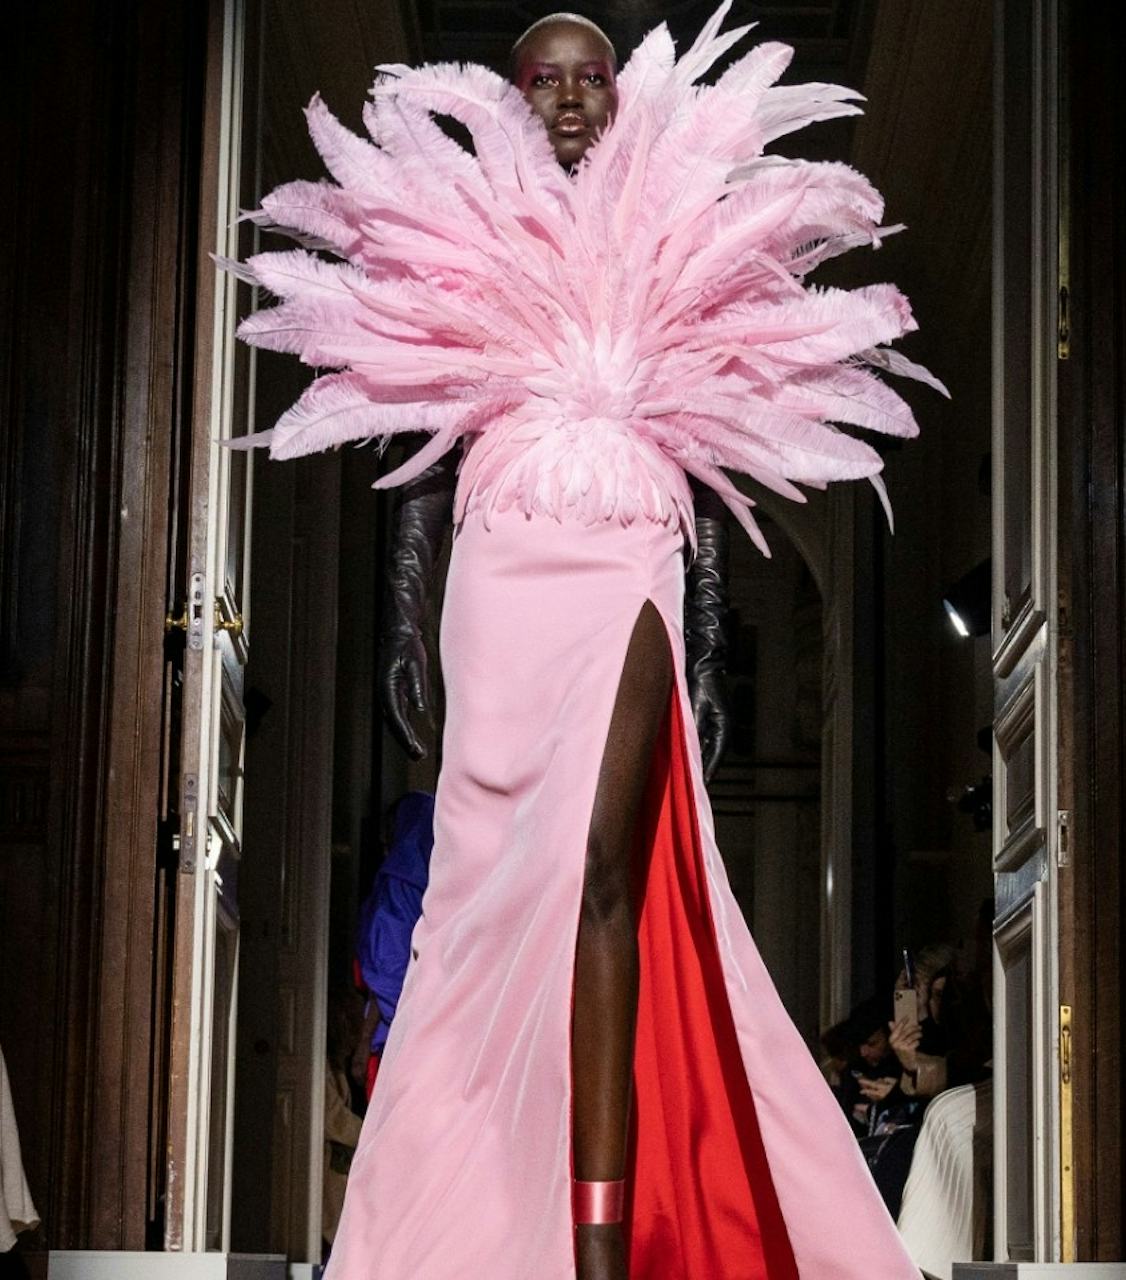 Paris Couture Week For July 2020 Has Been Canceled